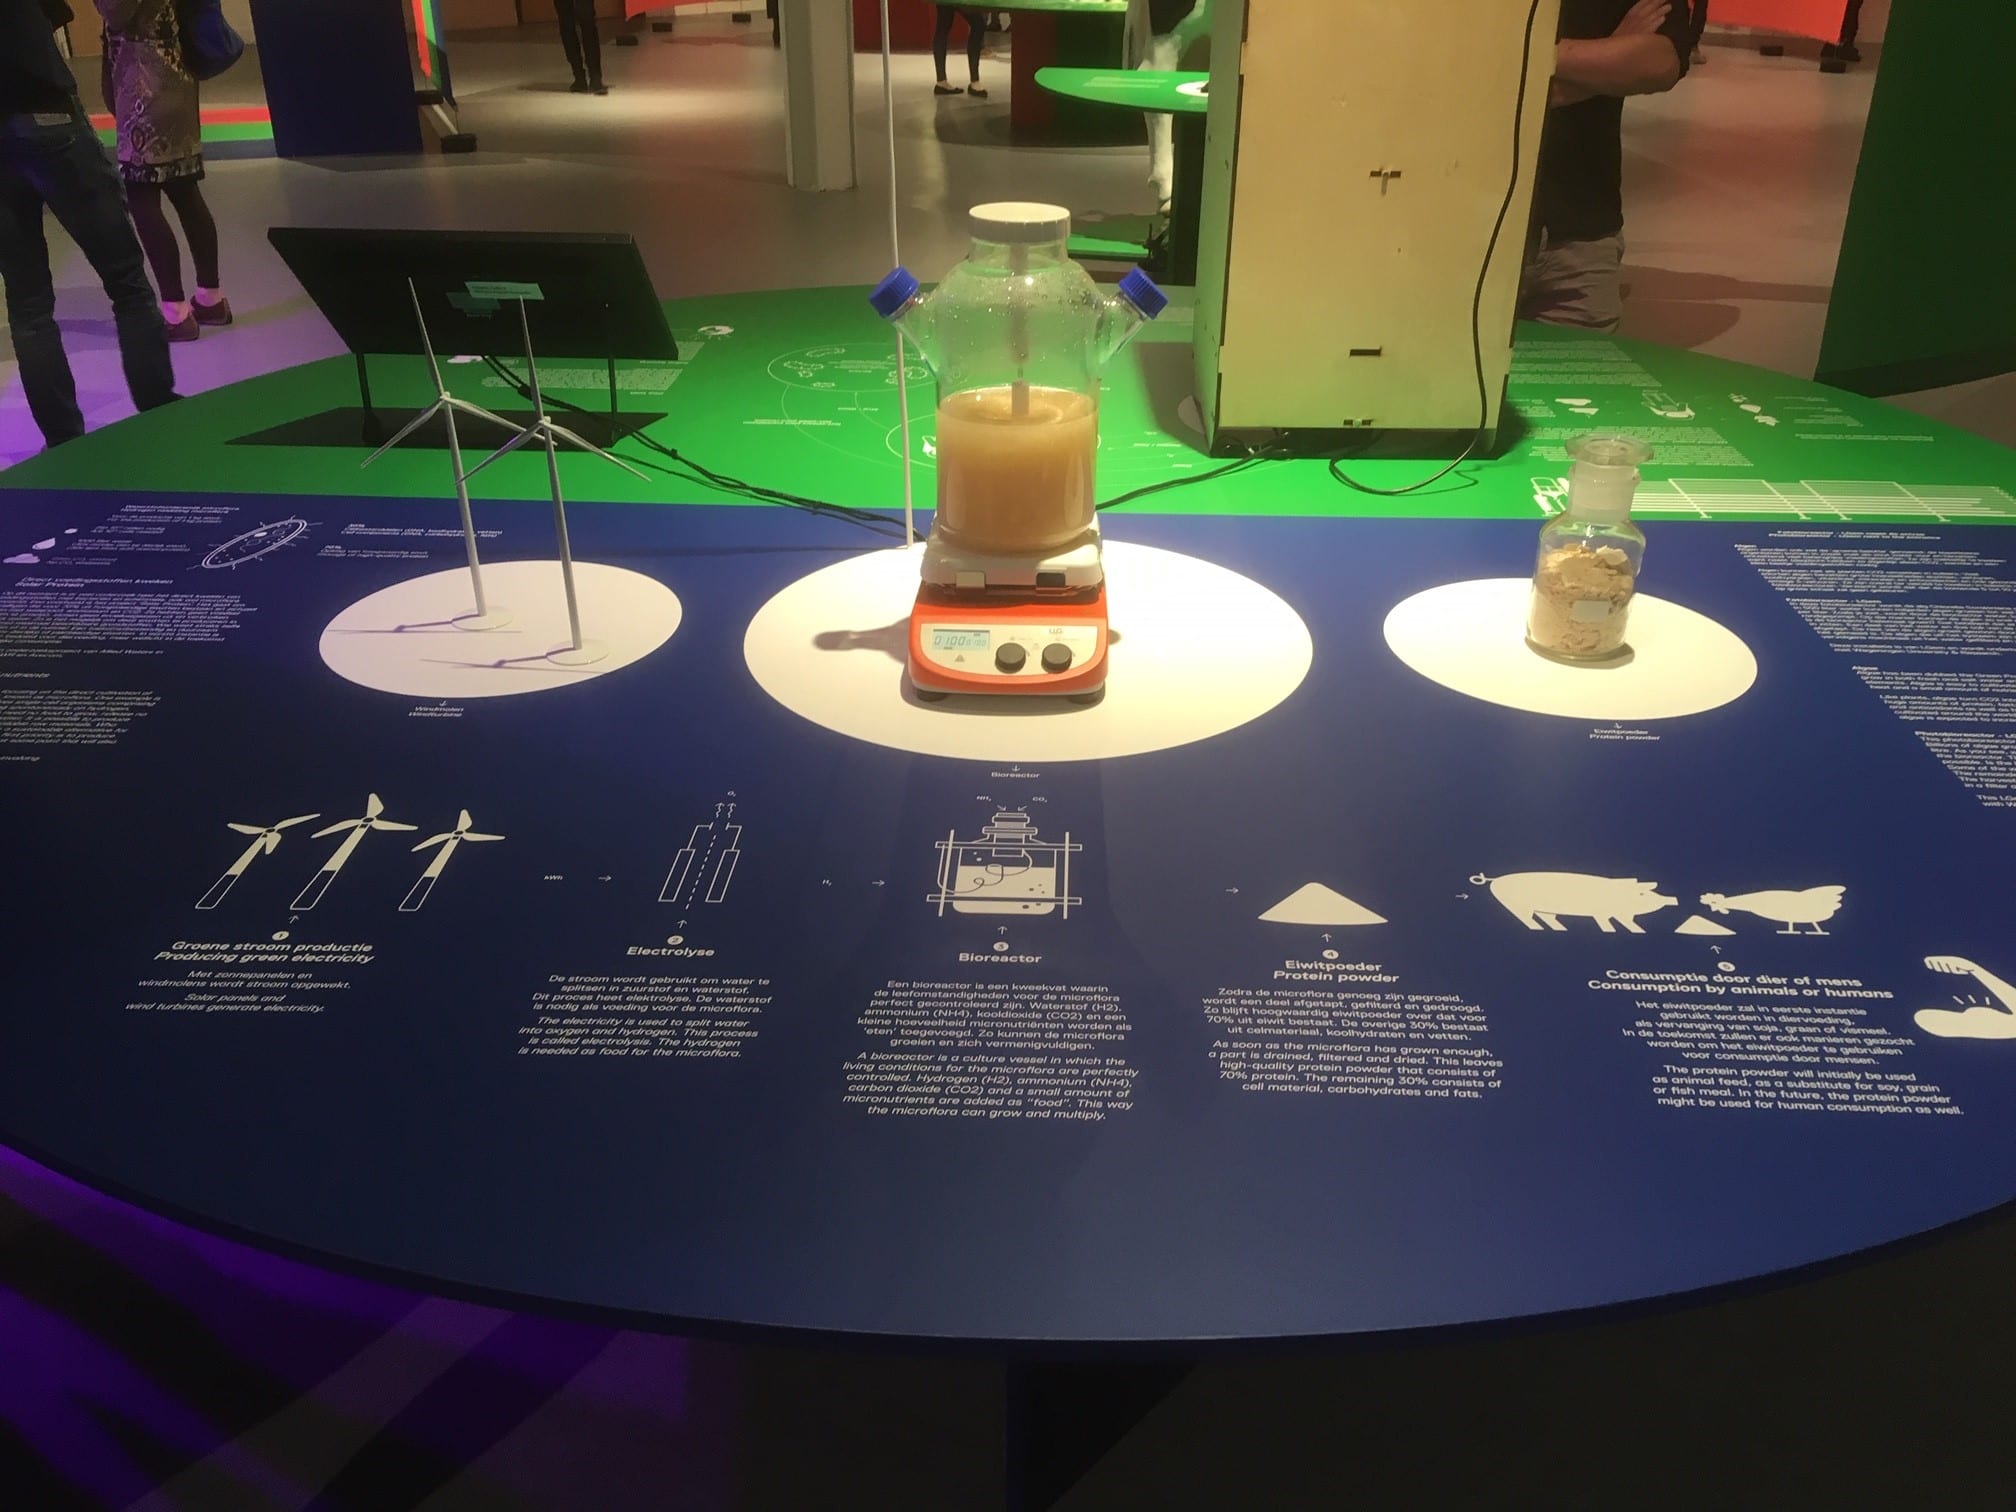 July 2019 PowertoProtein part of Future Food Exhibition at NEMO